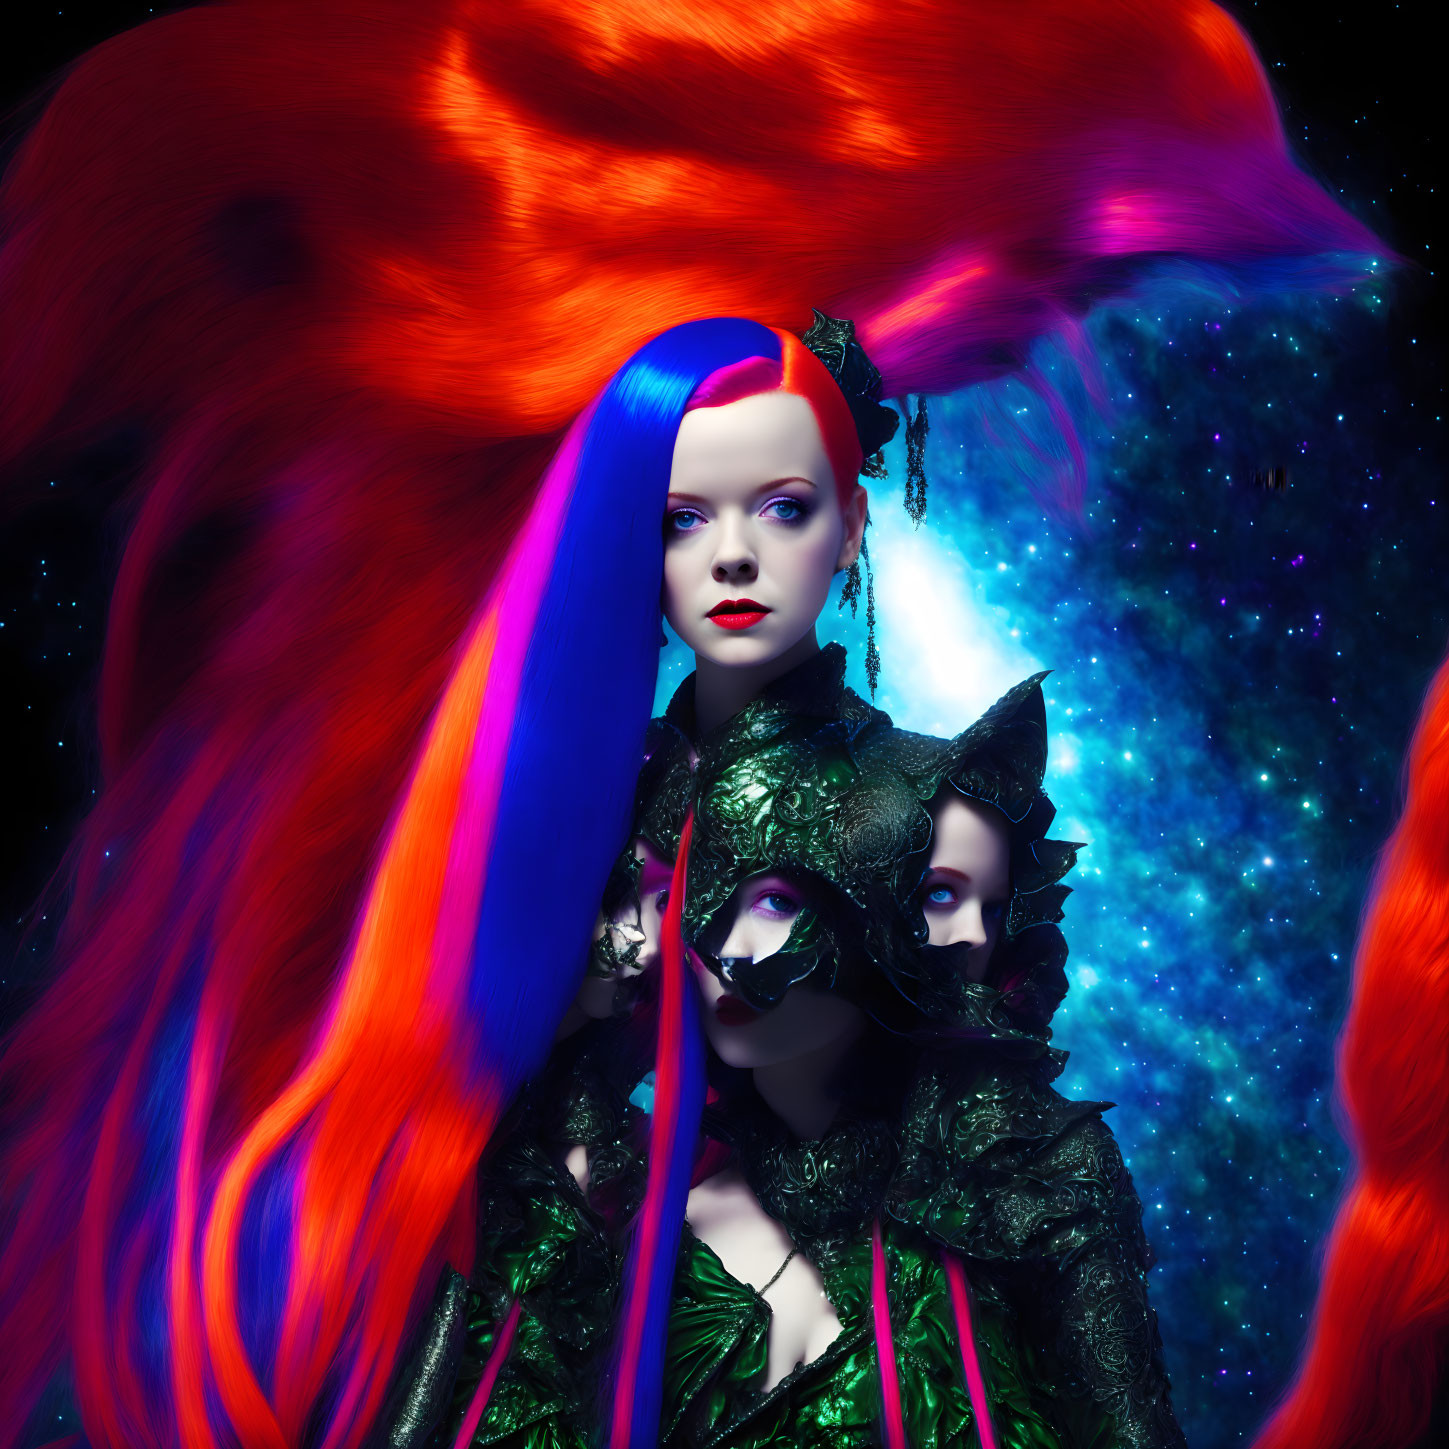 Colorful portrait of woman with blue and red hair in cosmic setting with two dark figures